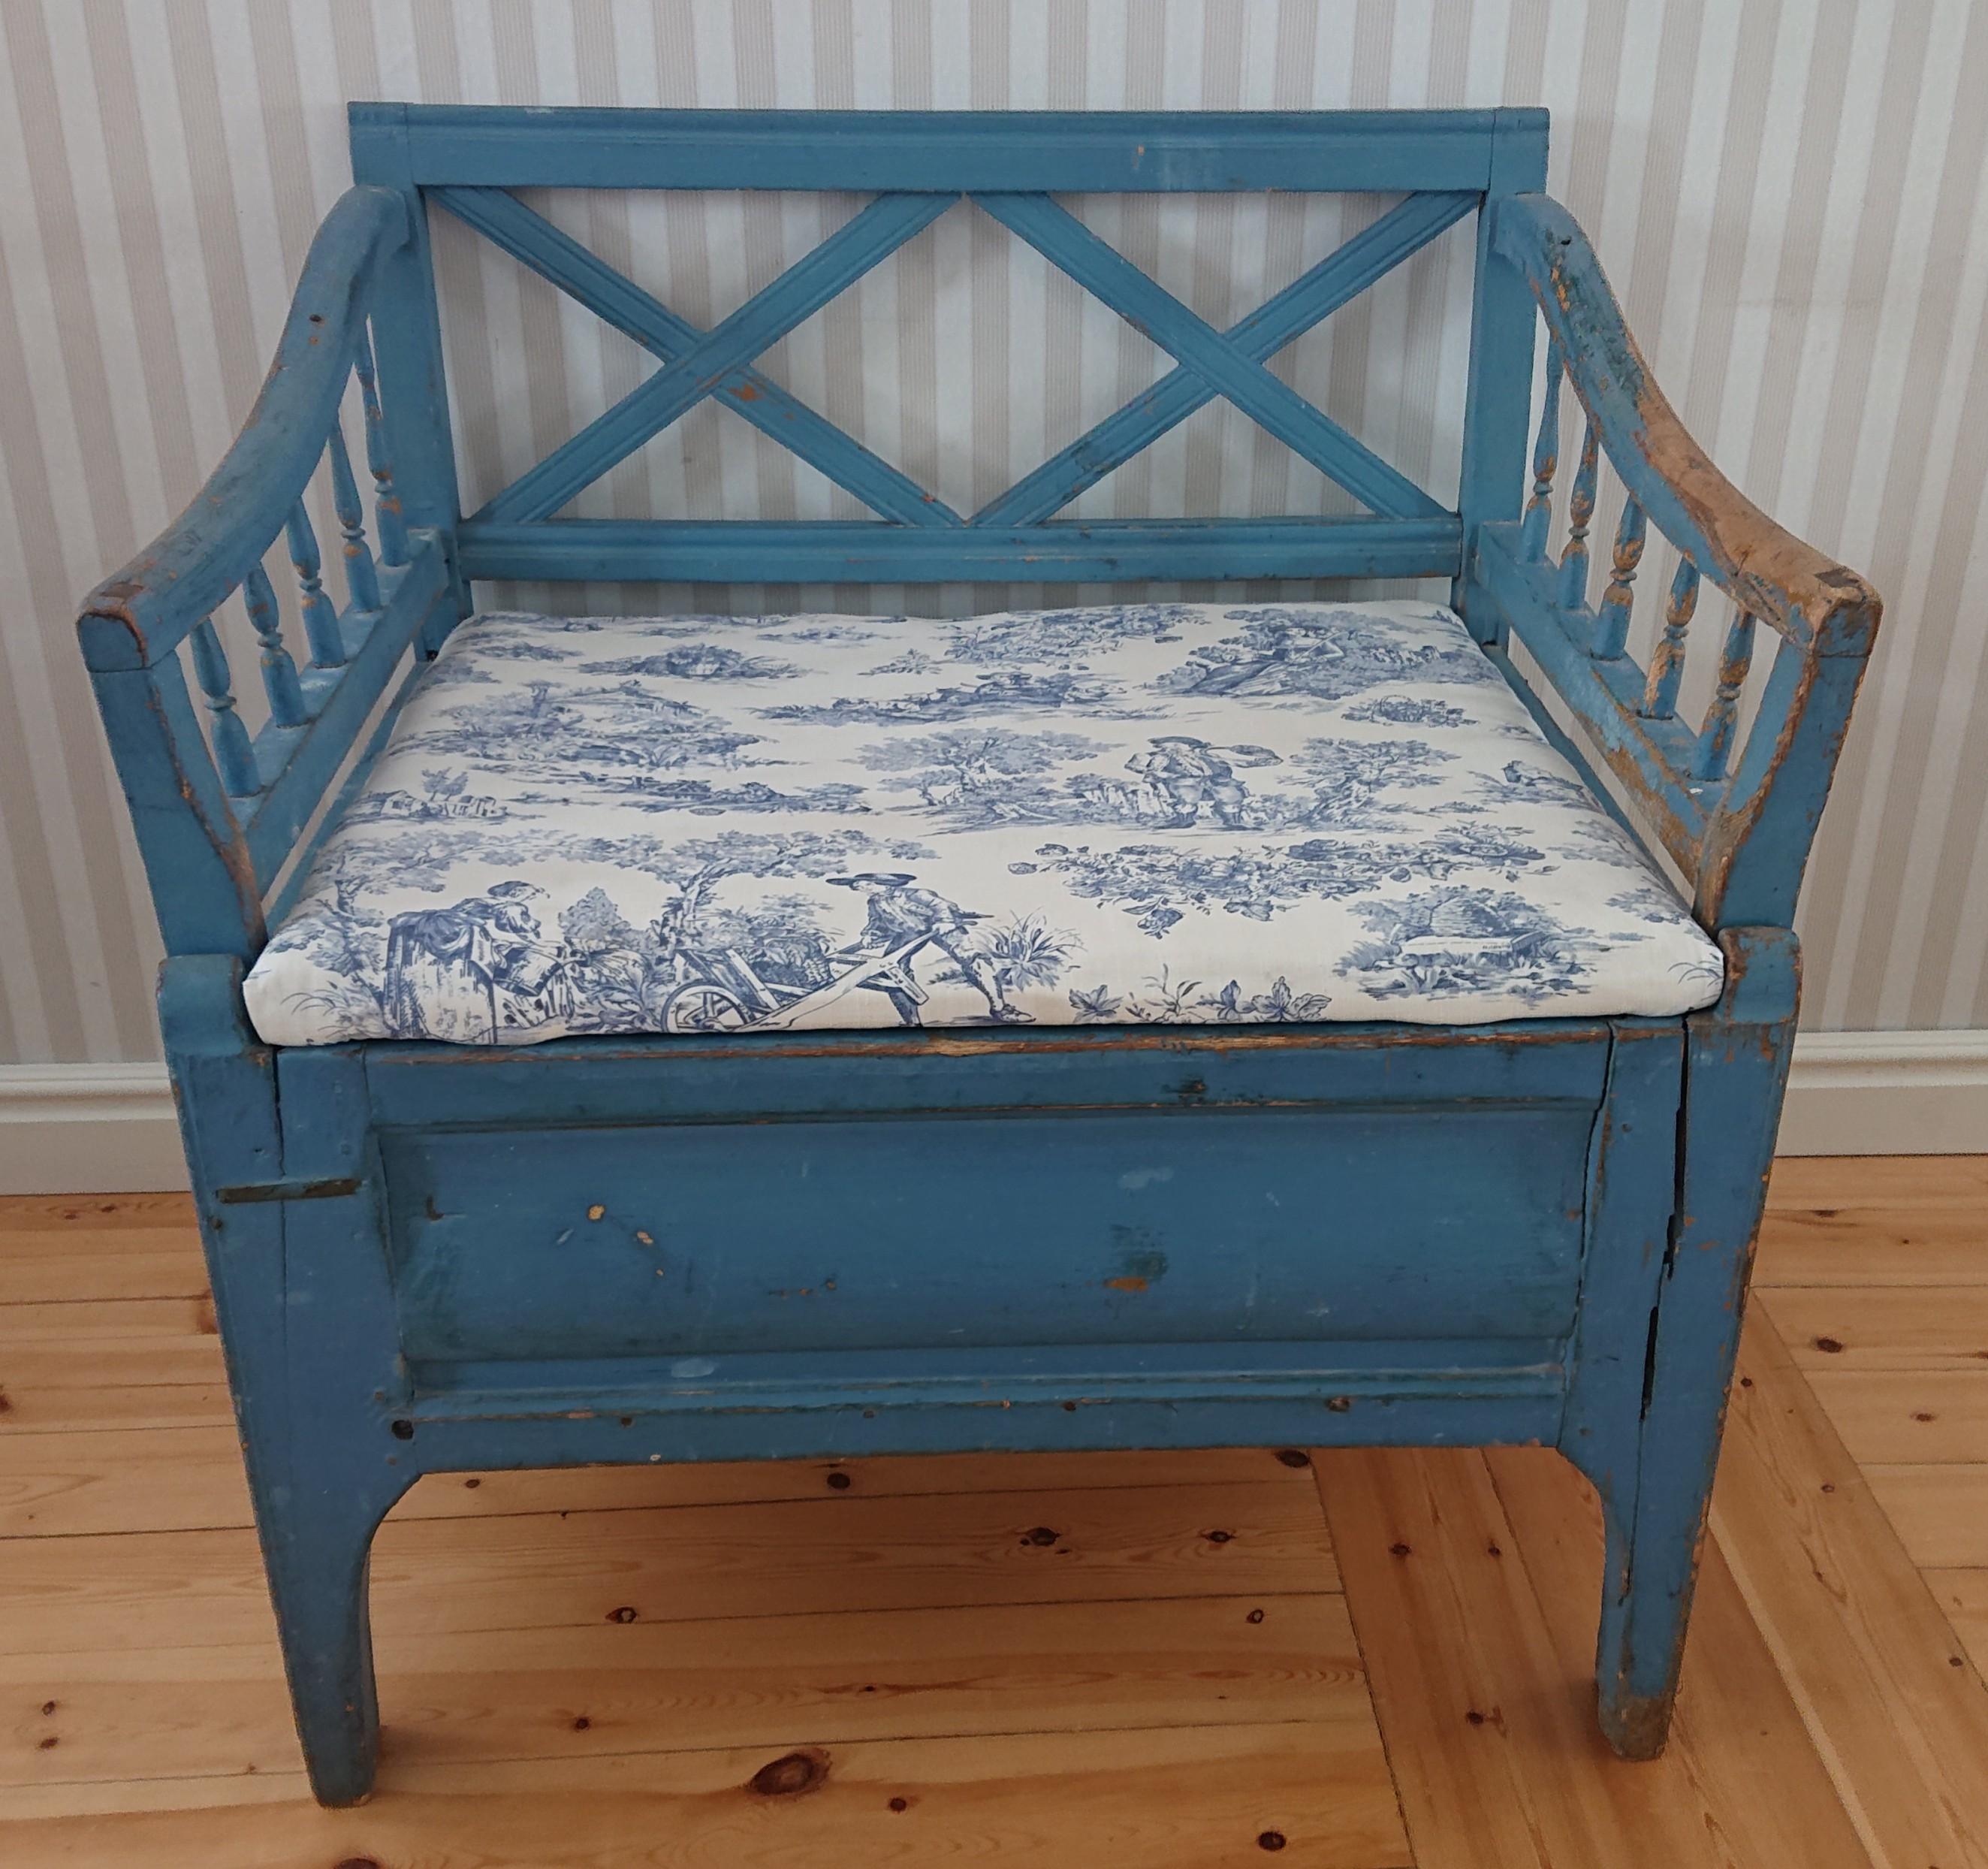 A lovely small Gustavian sofa from Ersnäs Luleå, Northern Sweden .
The sofa has untouched blue original paint.
Nice model, very easy to place.
Good storage under the lid.
The seat is reupholstered in a pattern fabric
Beautiful back with cross &